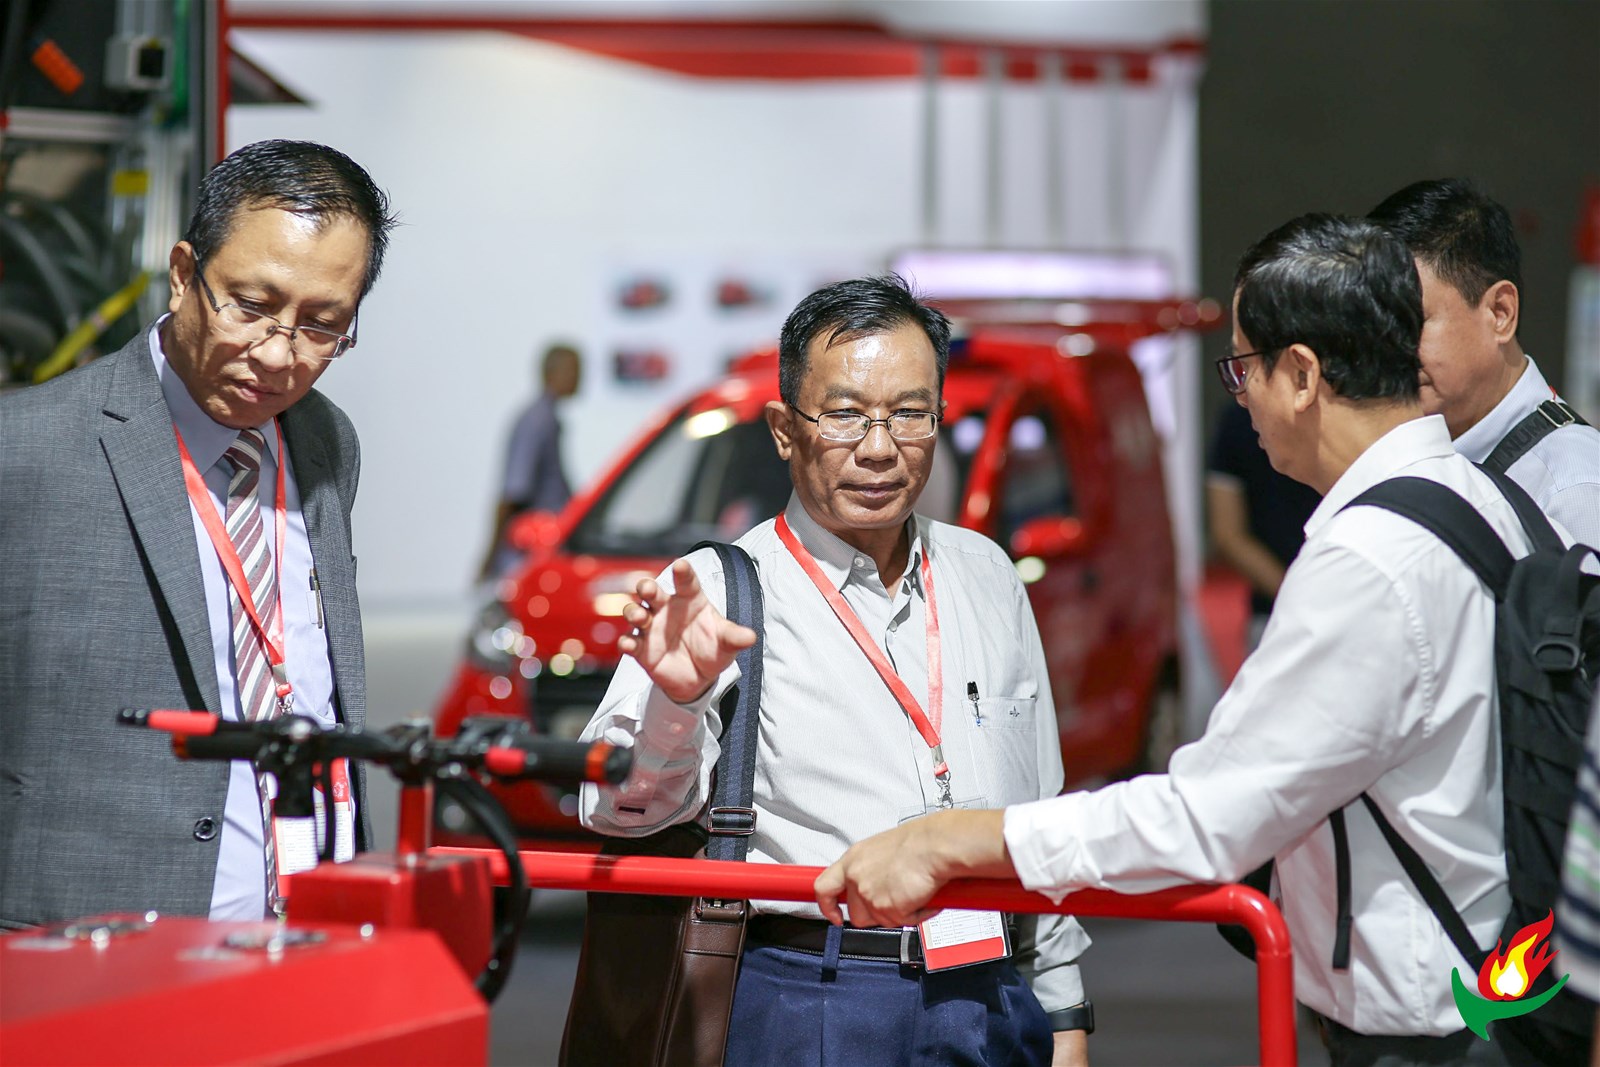 The 9th China Guangzhou International Fire Safety Emergency Equipment Expo CFE 2019